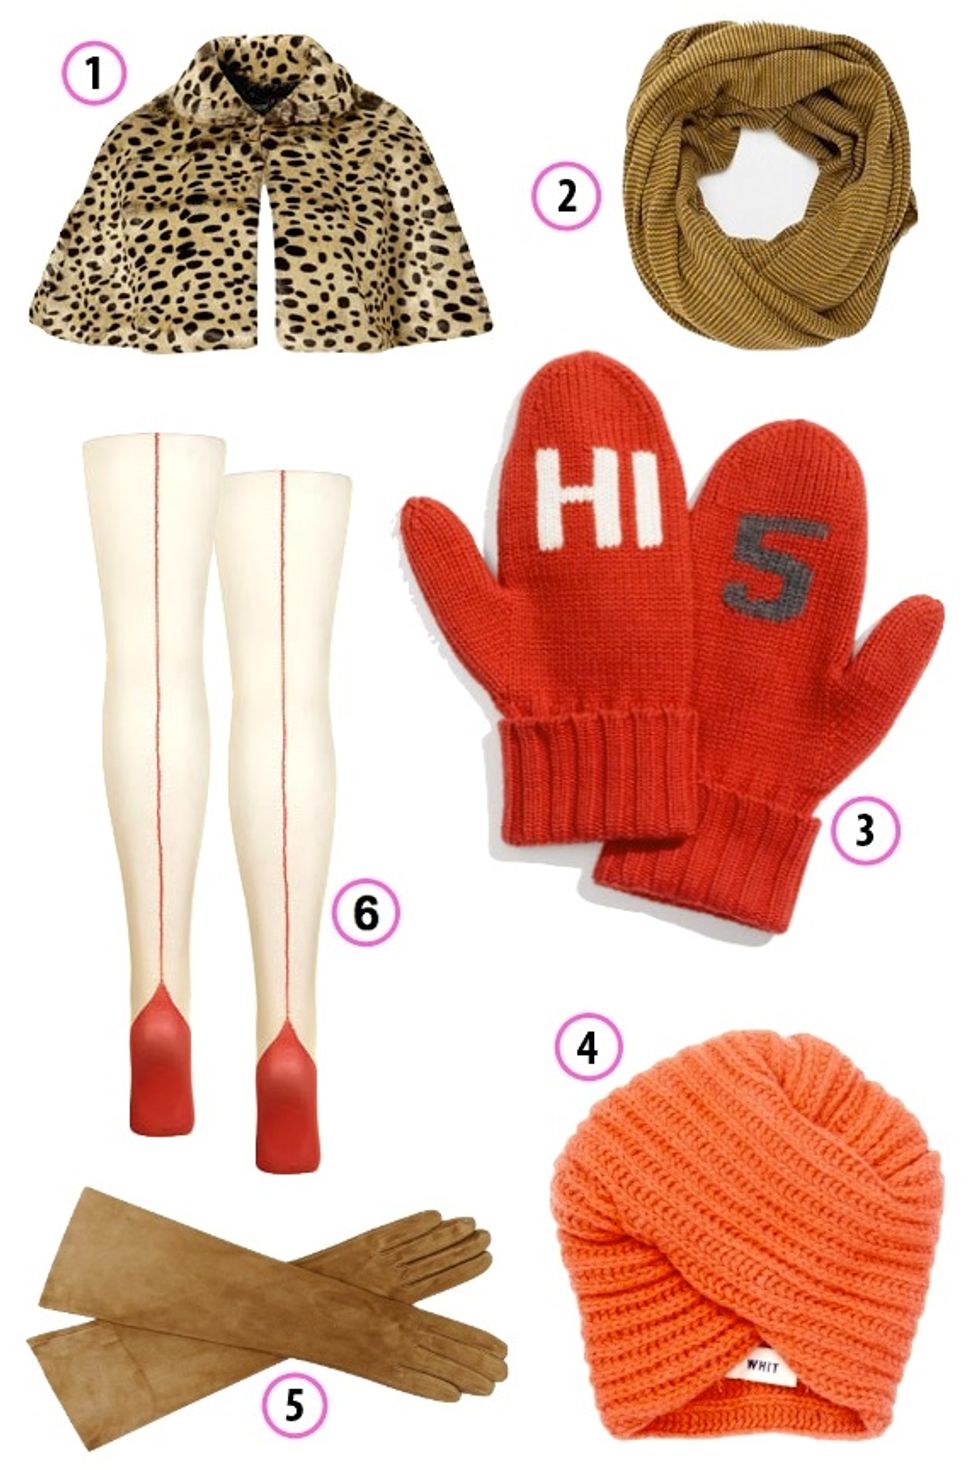 Look of the Week: Women's Cold Weather Accessories We Love